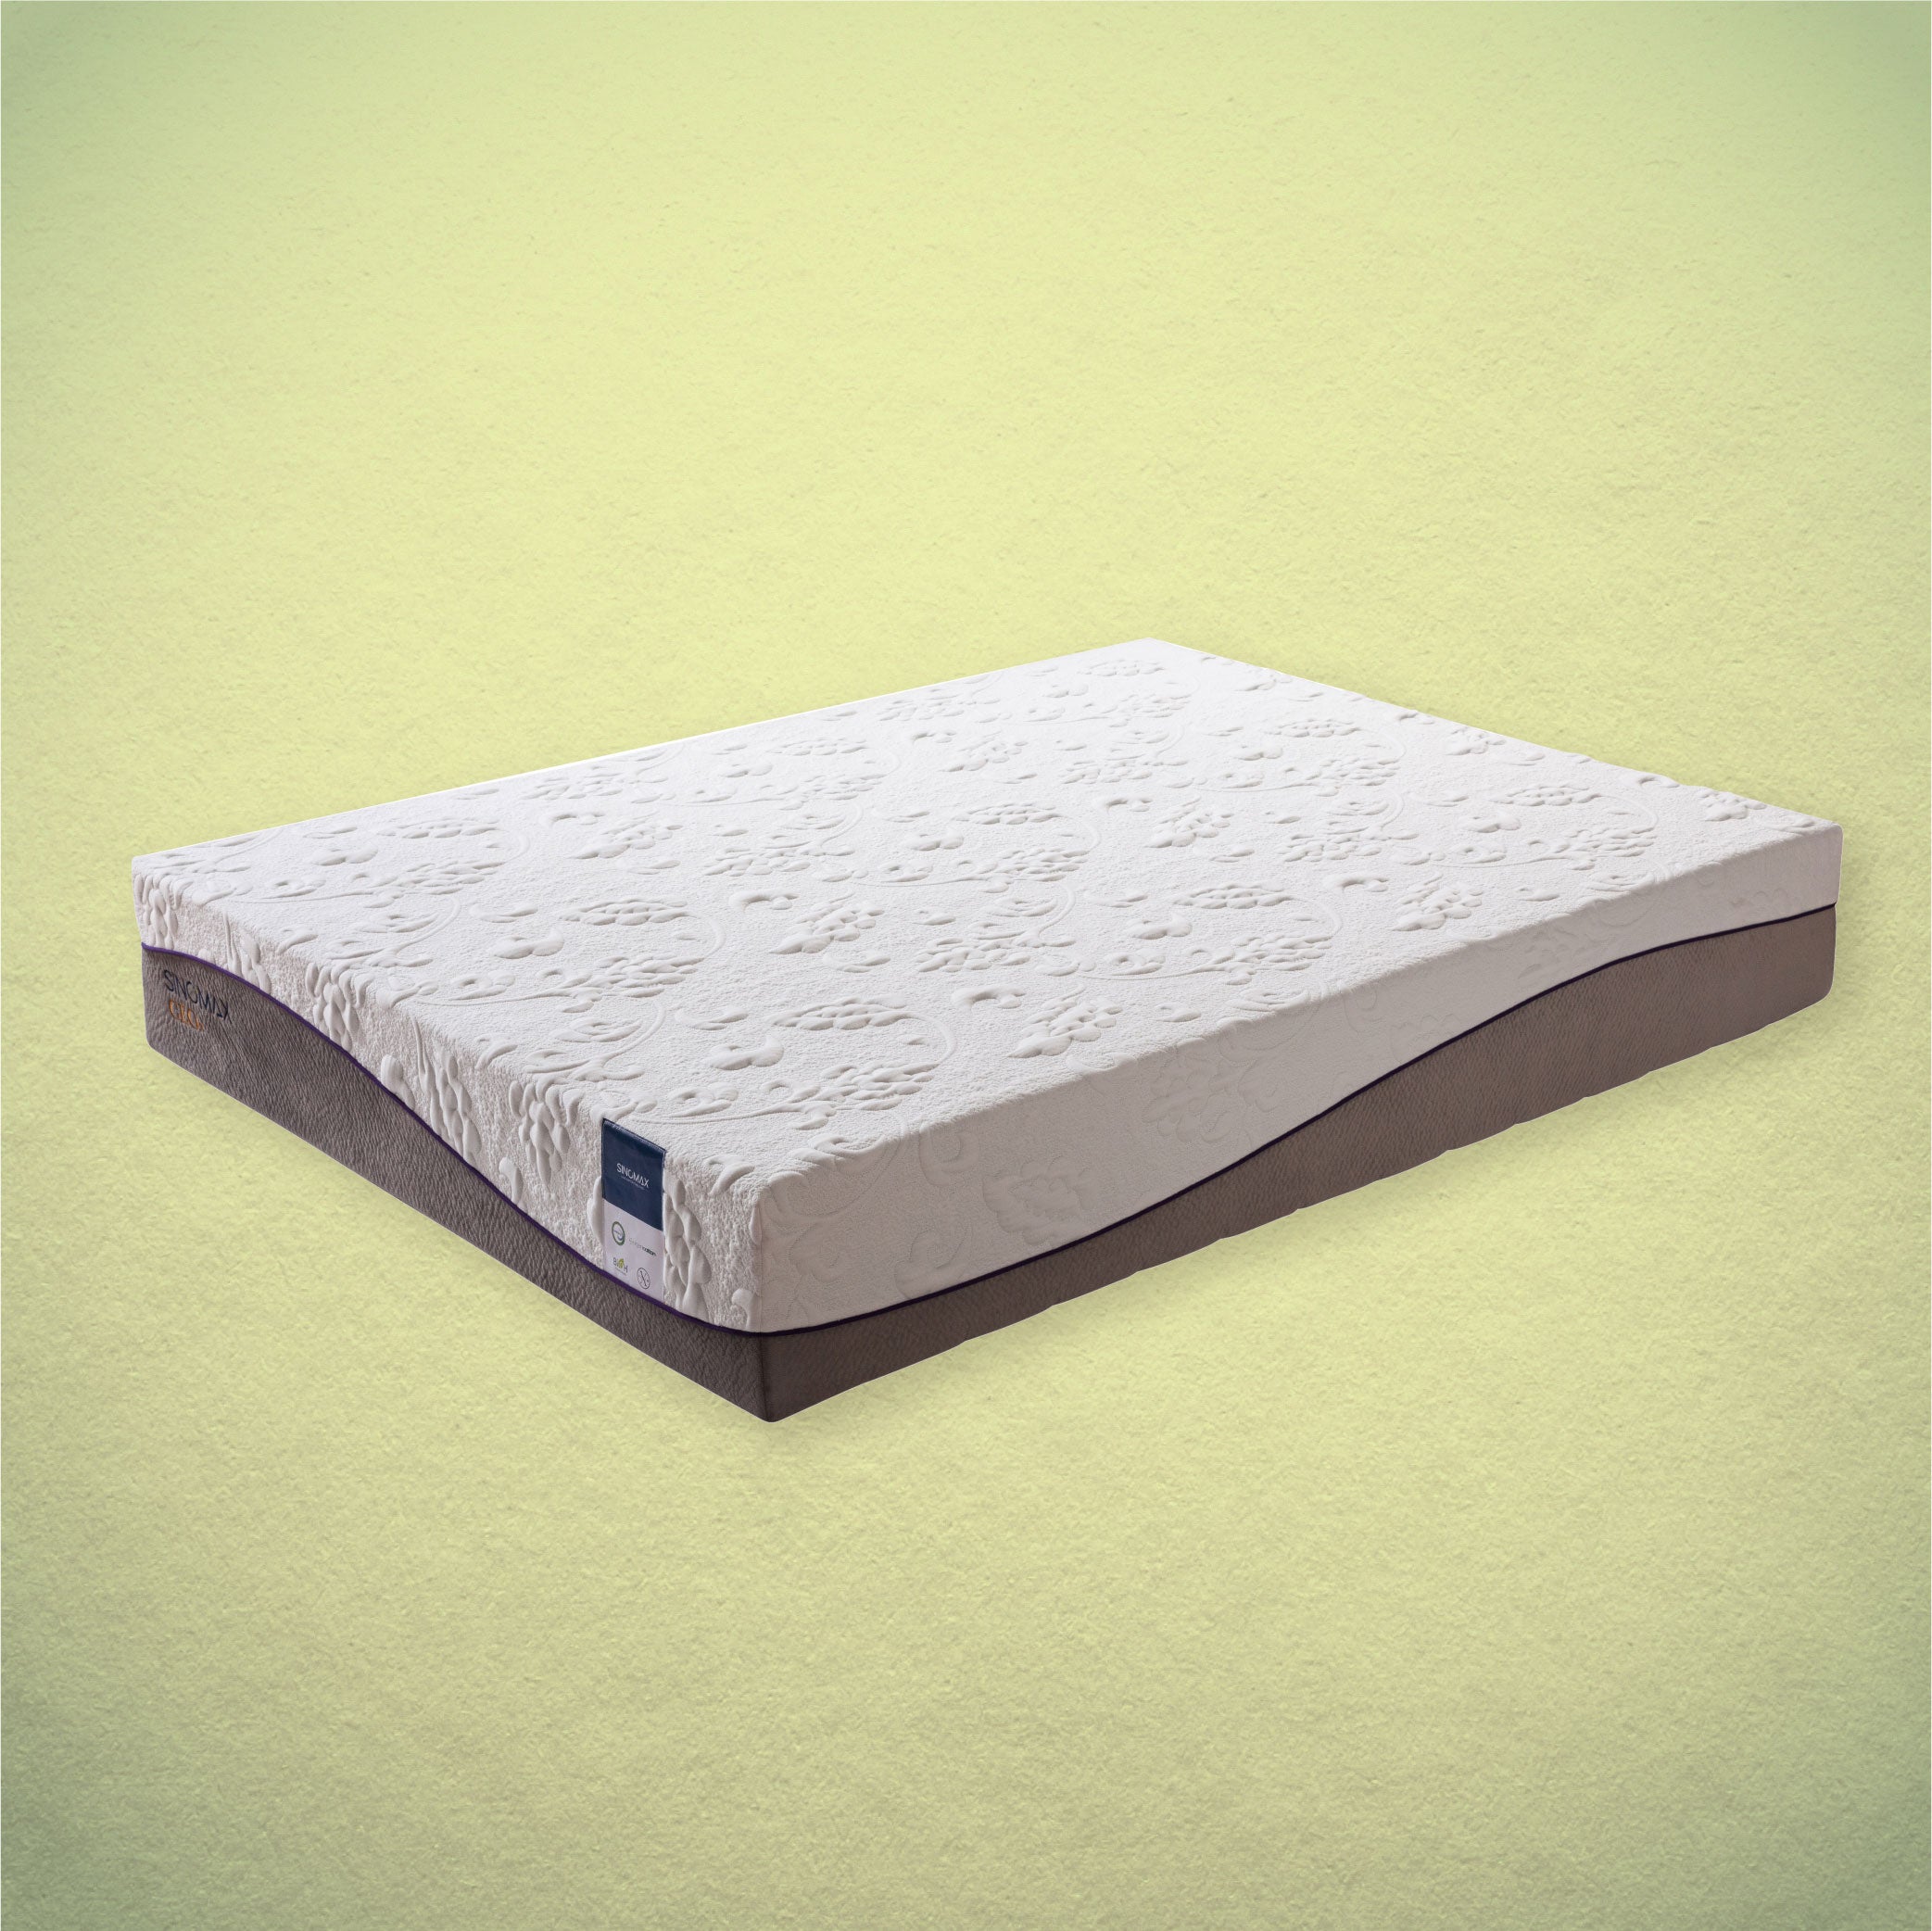 CEOx ULTRA Mattress - Tailor-made Size (48"W or below)
